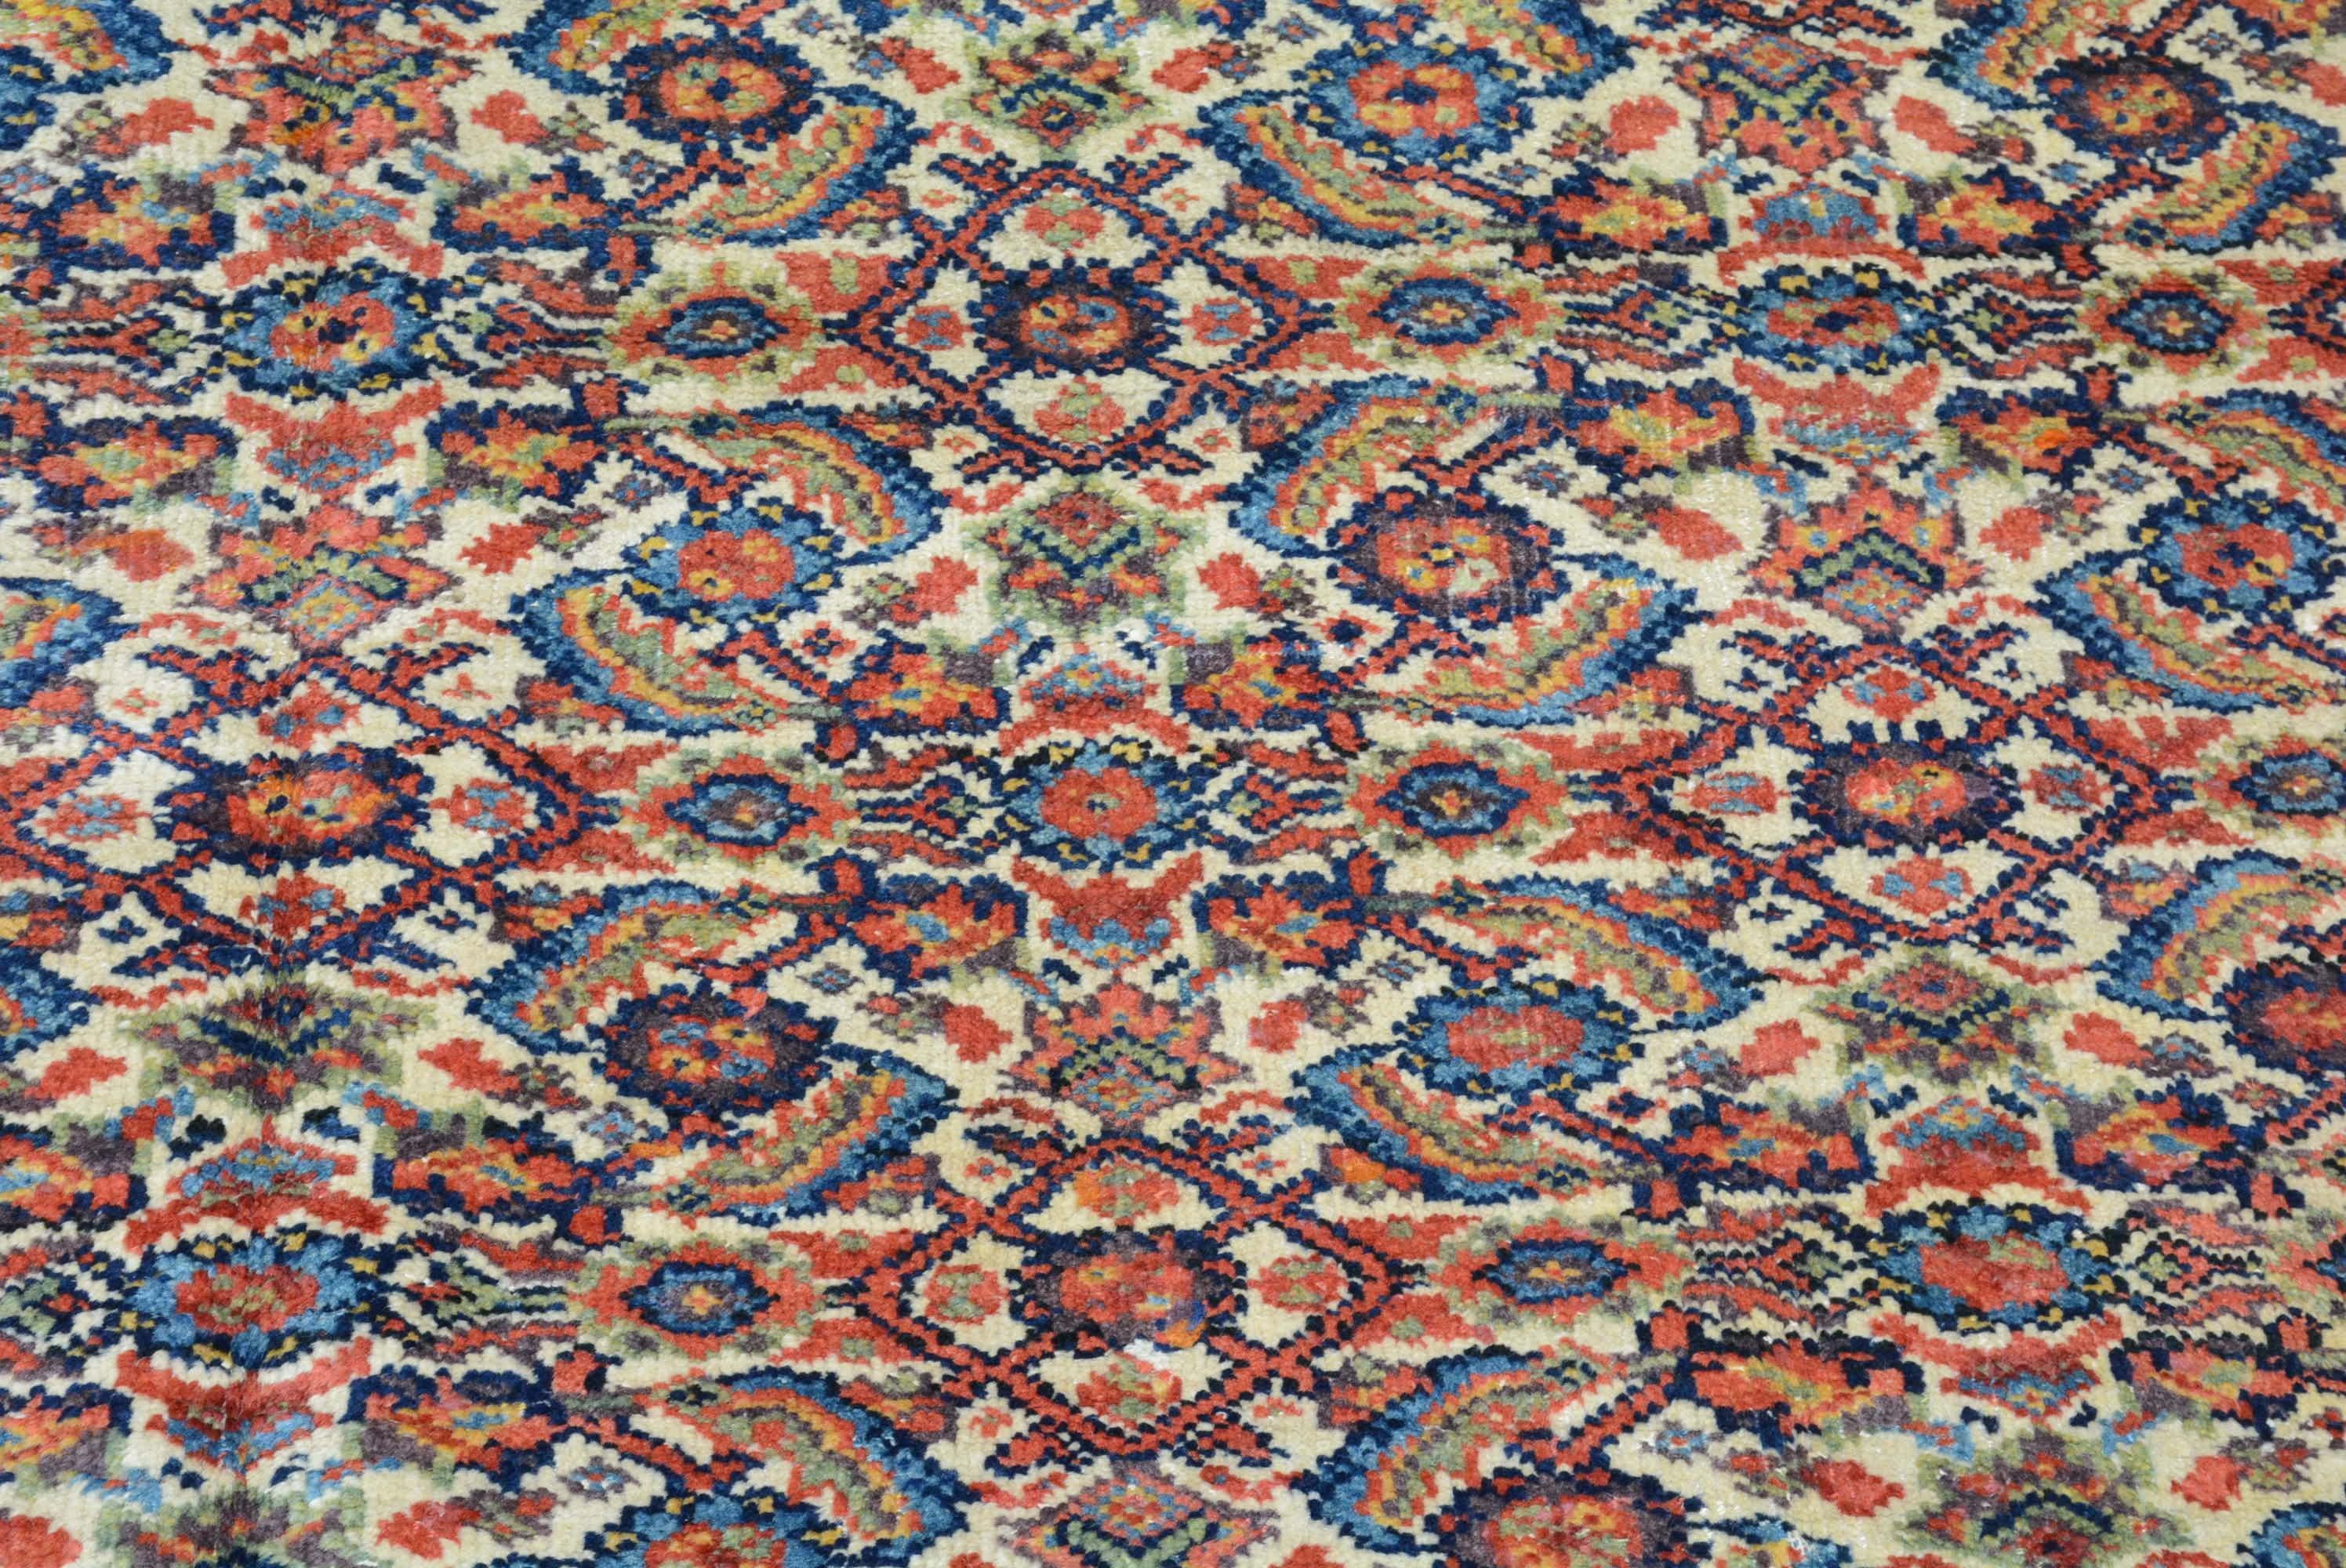 The Arak province in northern Persia has produced the greatest number of large carpets of any other Persian province. Named for the plain of Fereghan, an area of roughly 1200 square miles to the northeast of Arak, Fereghan rugs and carpets often